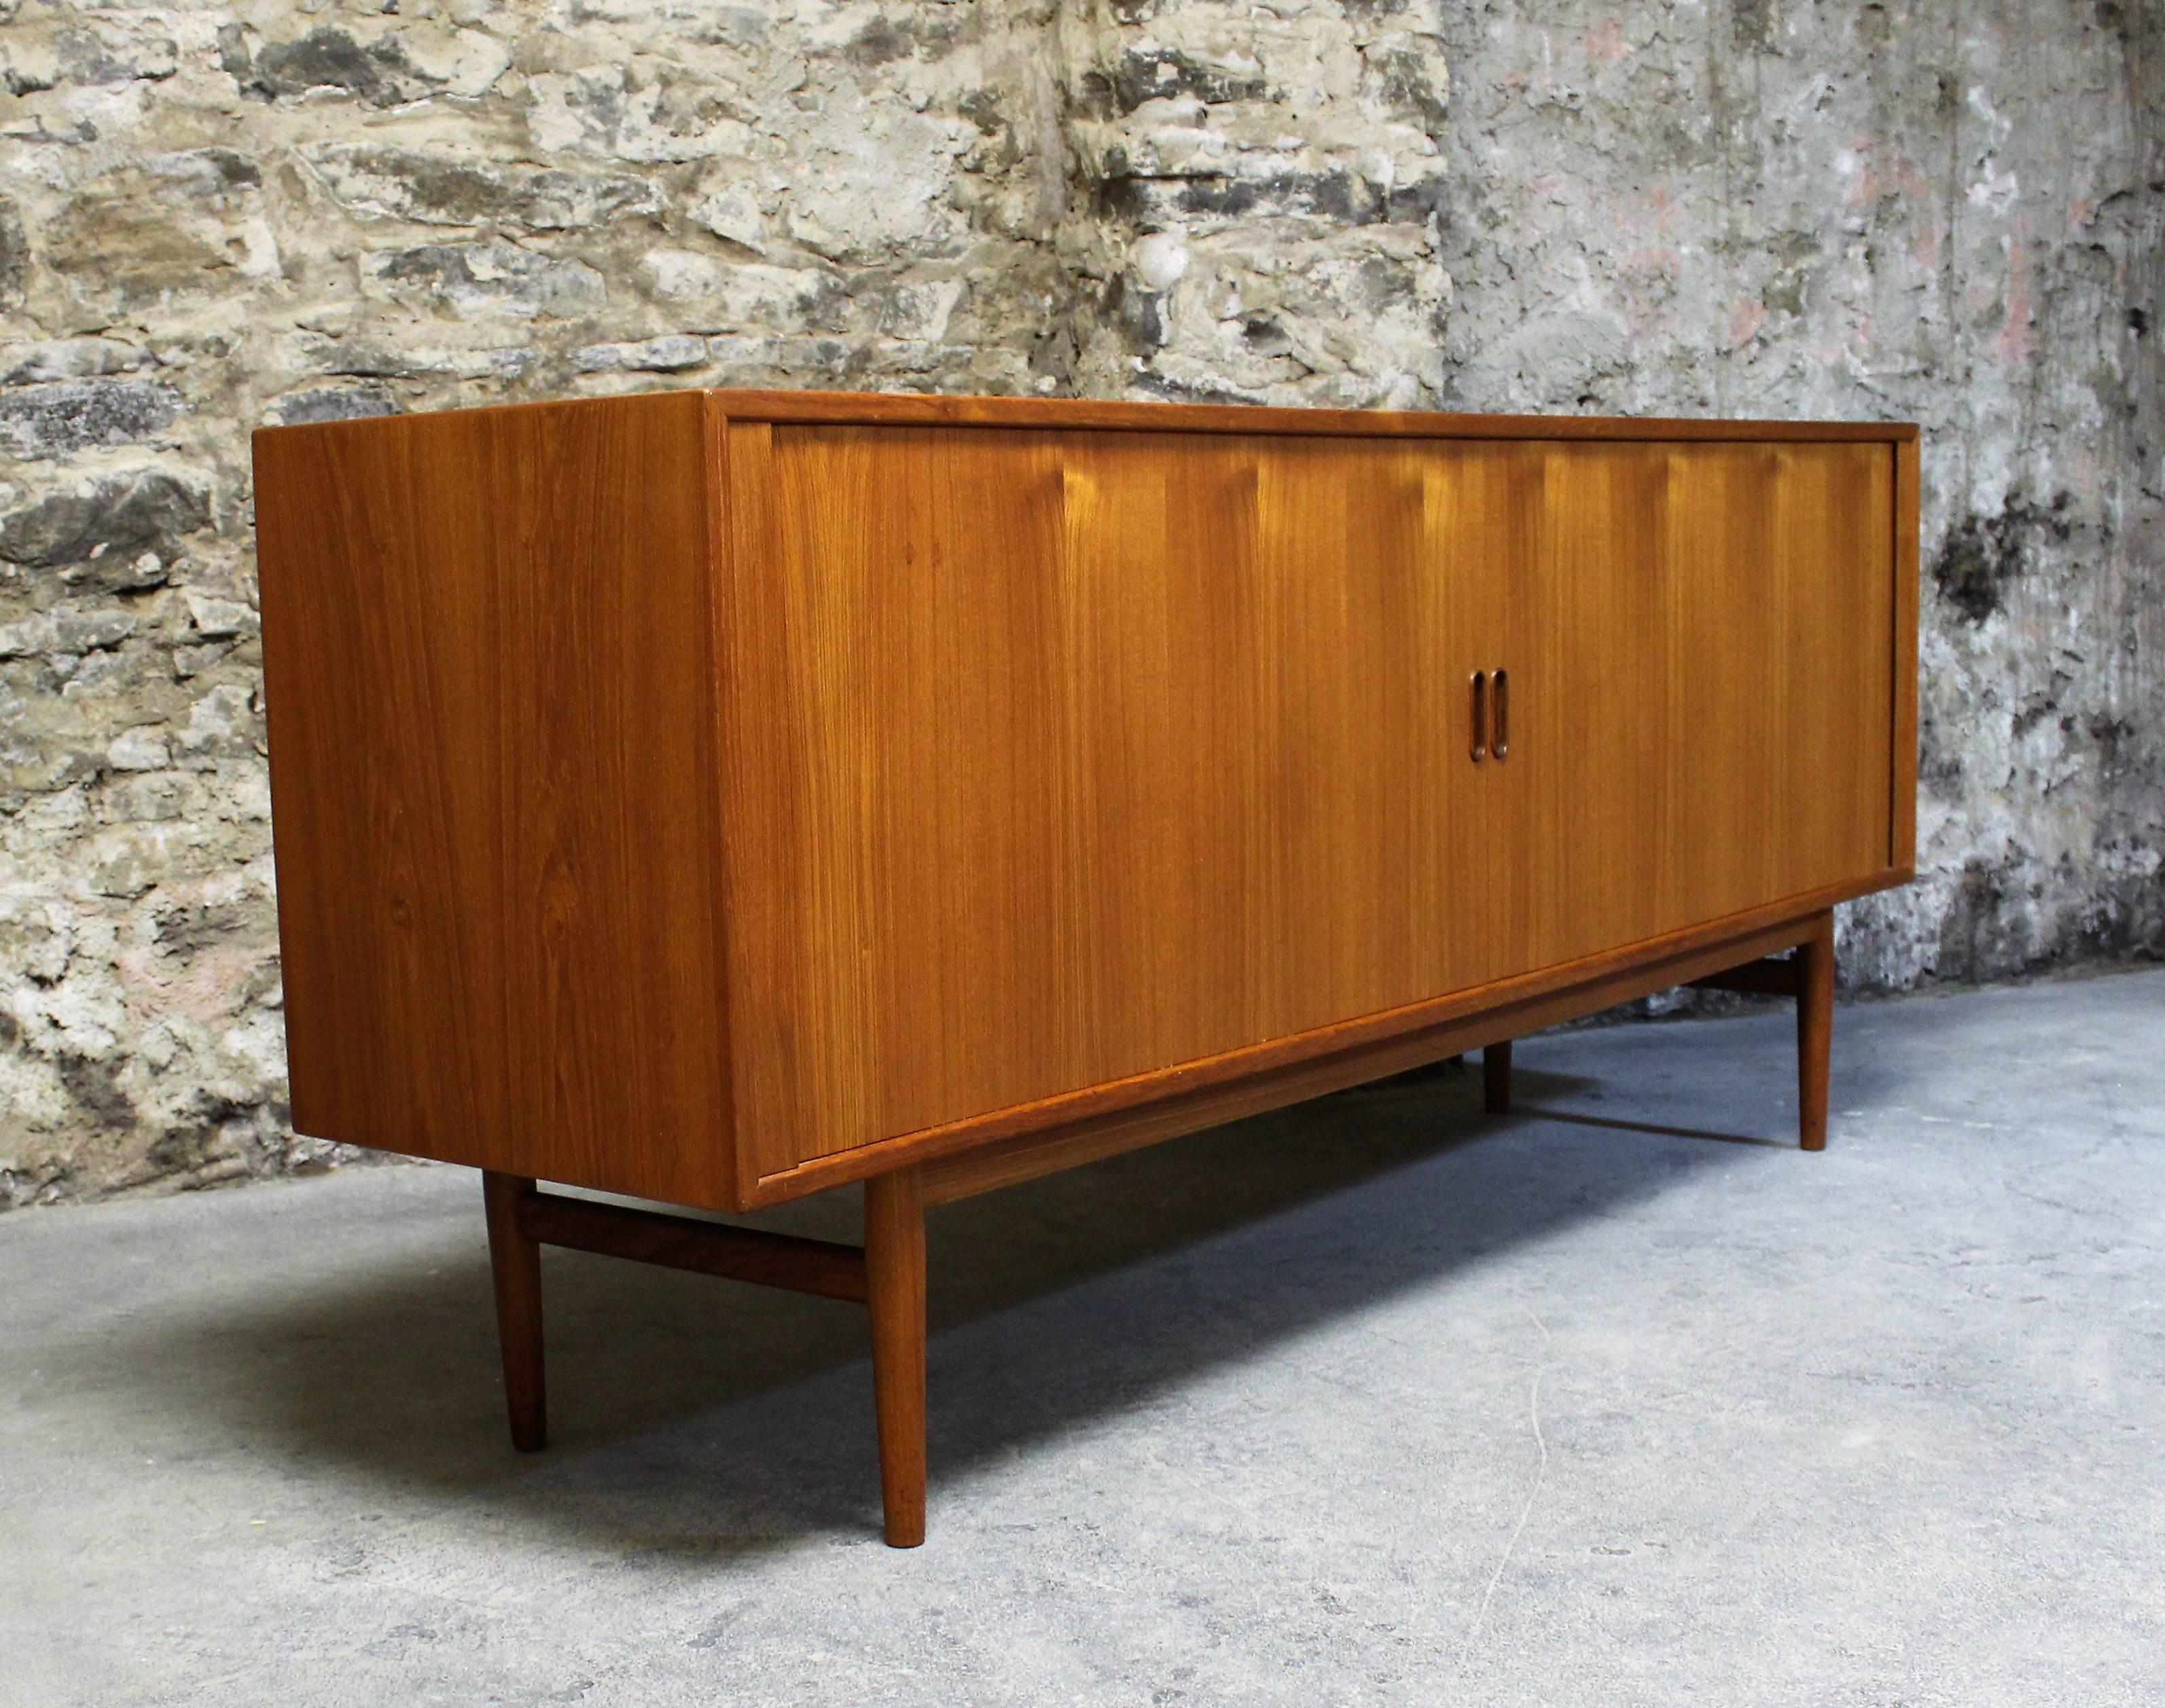 Mid-Century Modern credenza designed by Arne Vodder for Sibast. Labelled with the maker's mark and Danish control emblem. Featuring beautifully aged teak wood and tambour doors that glide back into the cabinet giving unobstructed access to the